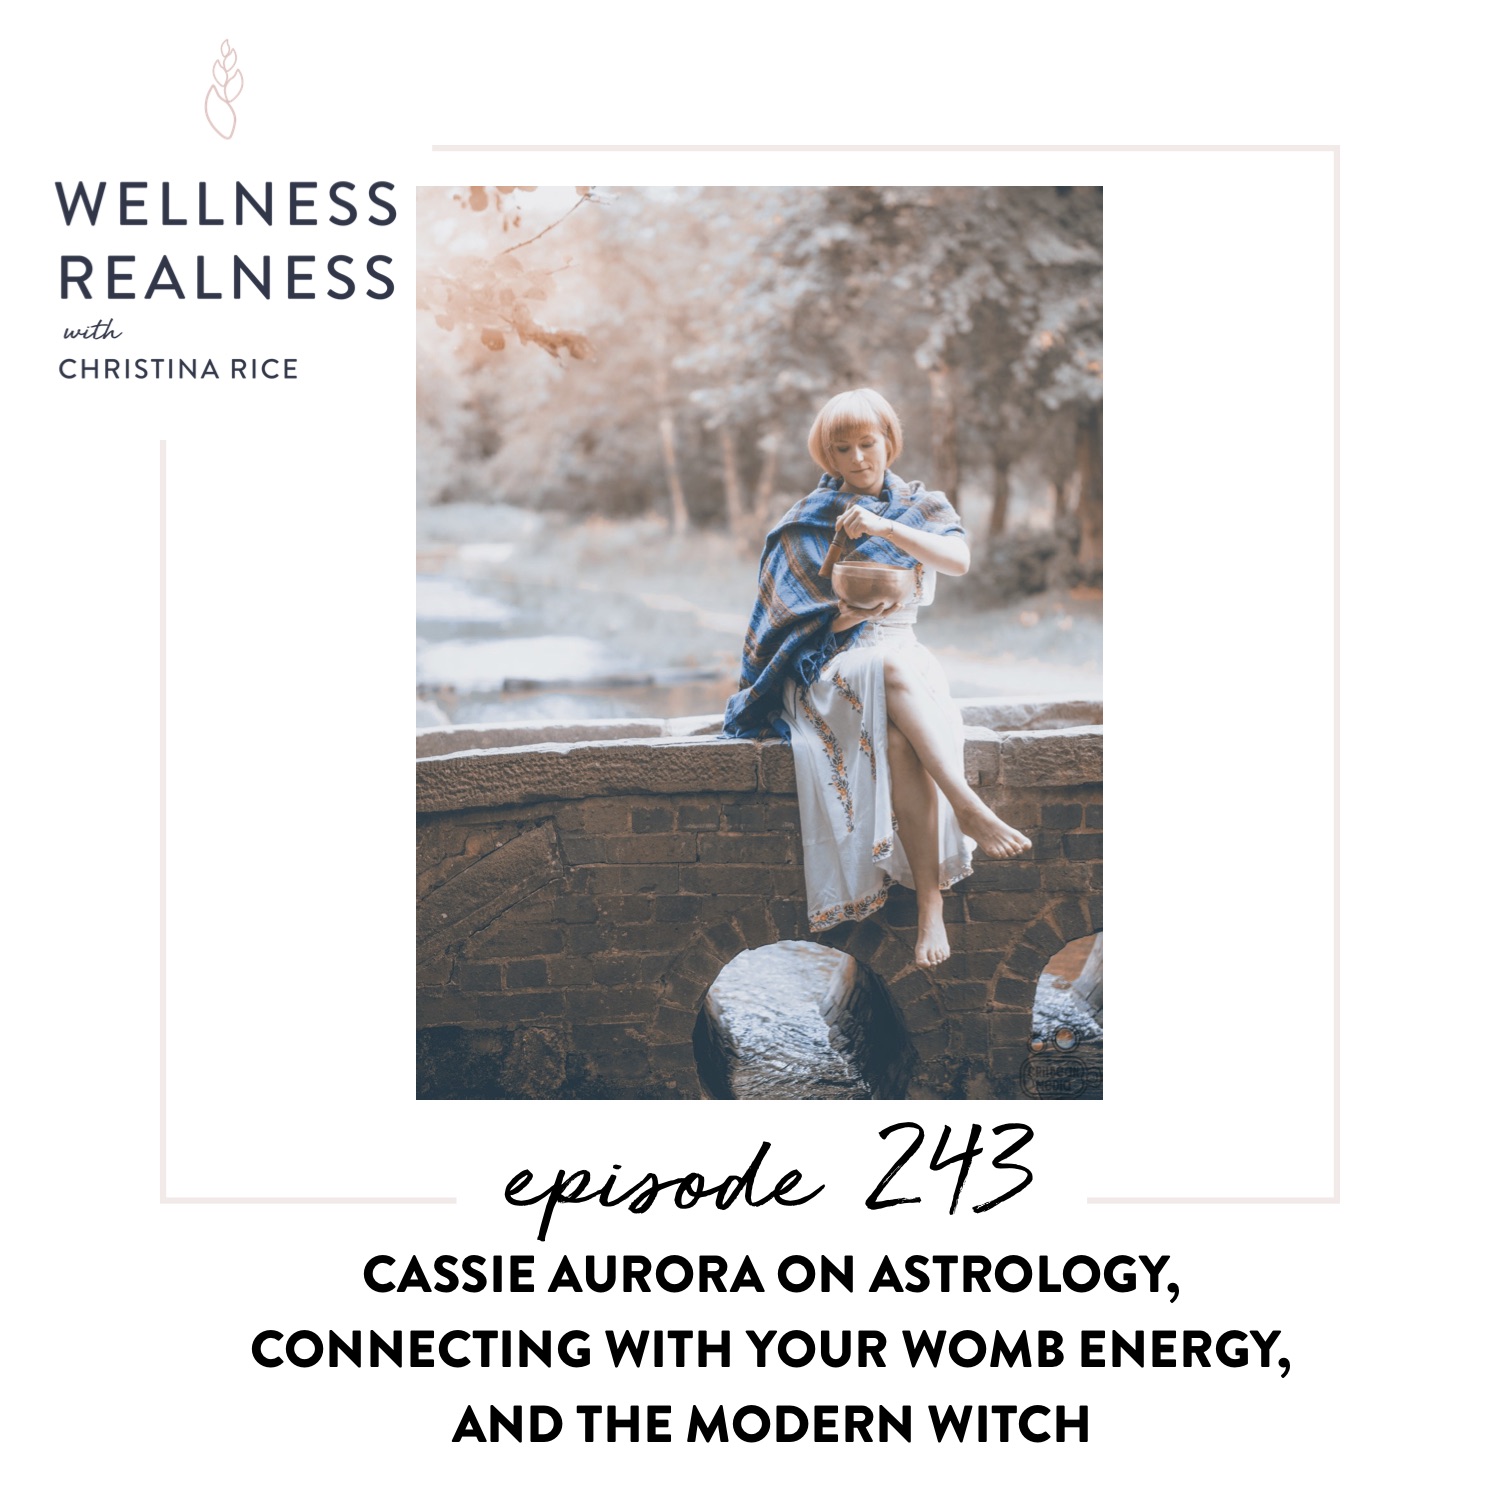 243: Cassie Aurora on Astrology, Connecting with Your Womb Energy, and the Modern Witch